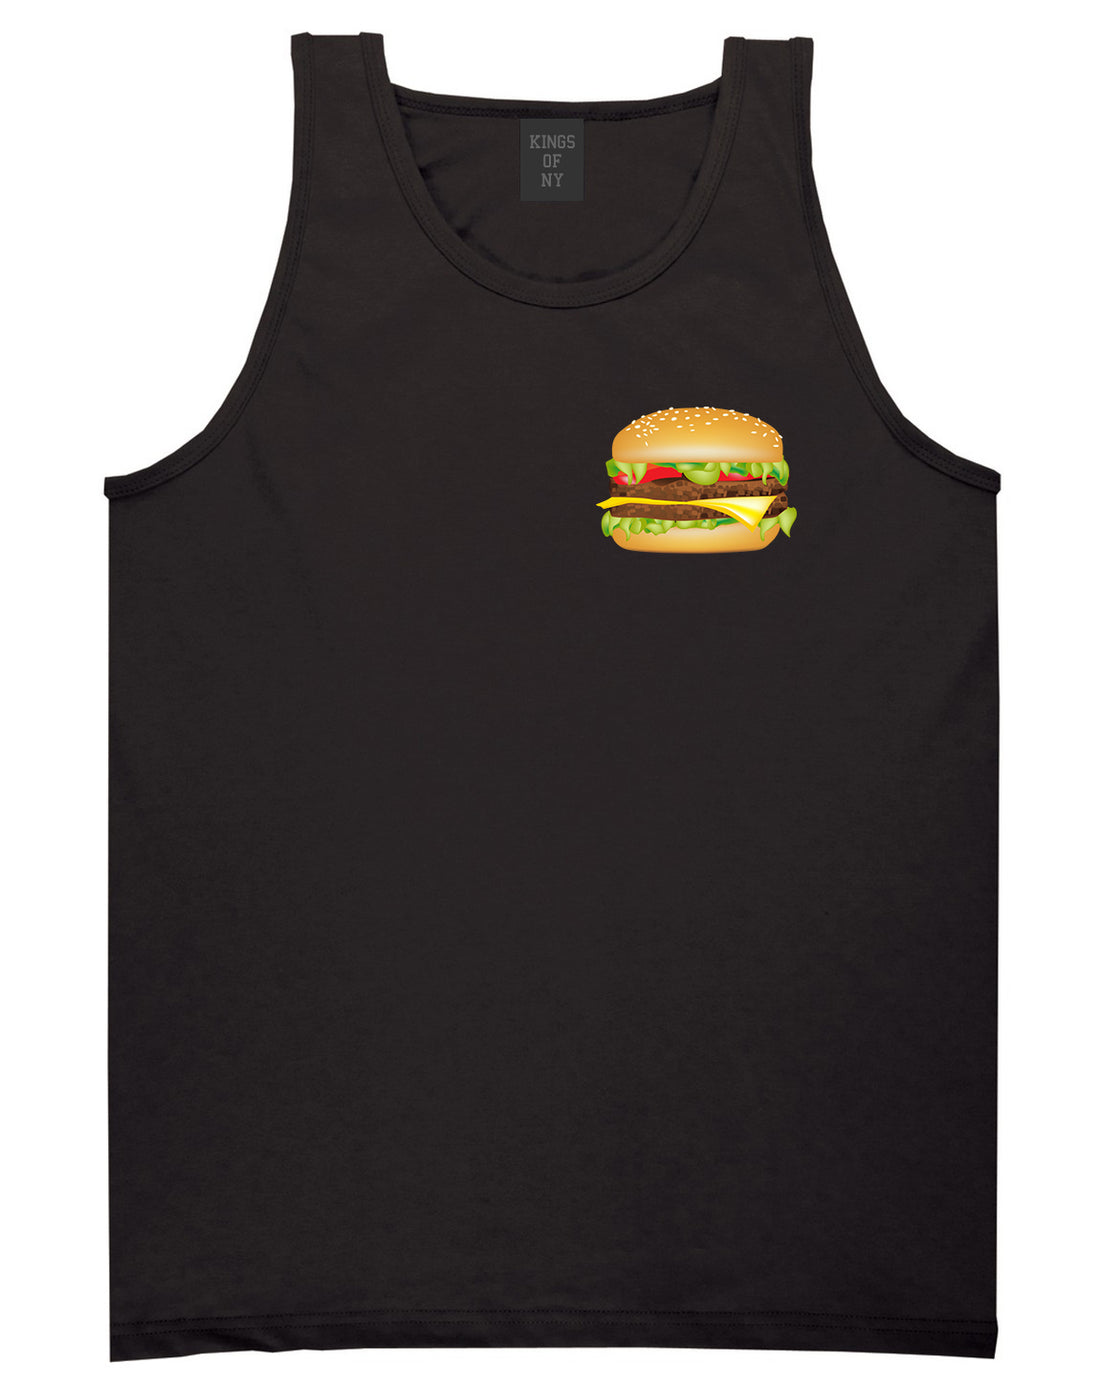 Burger Chest Black Tank Top Shirt by Kings Of NY